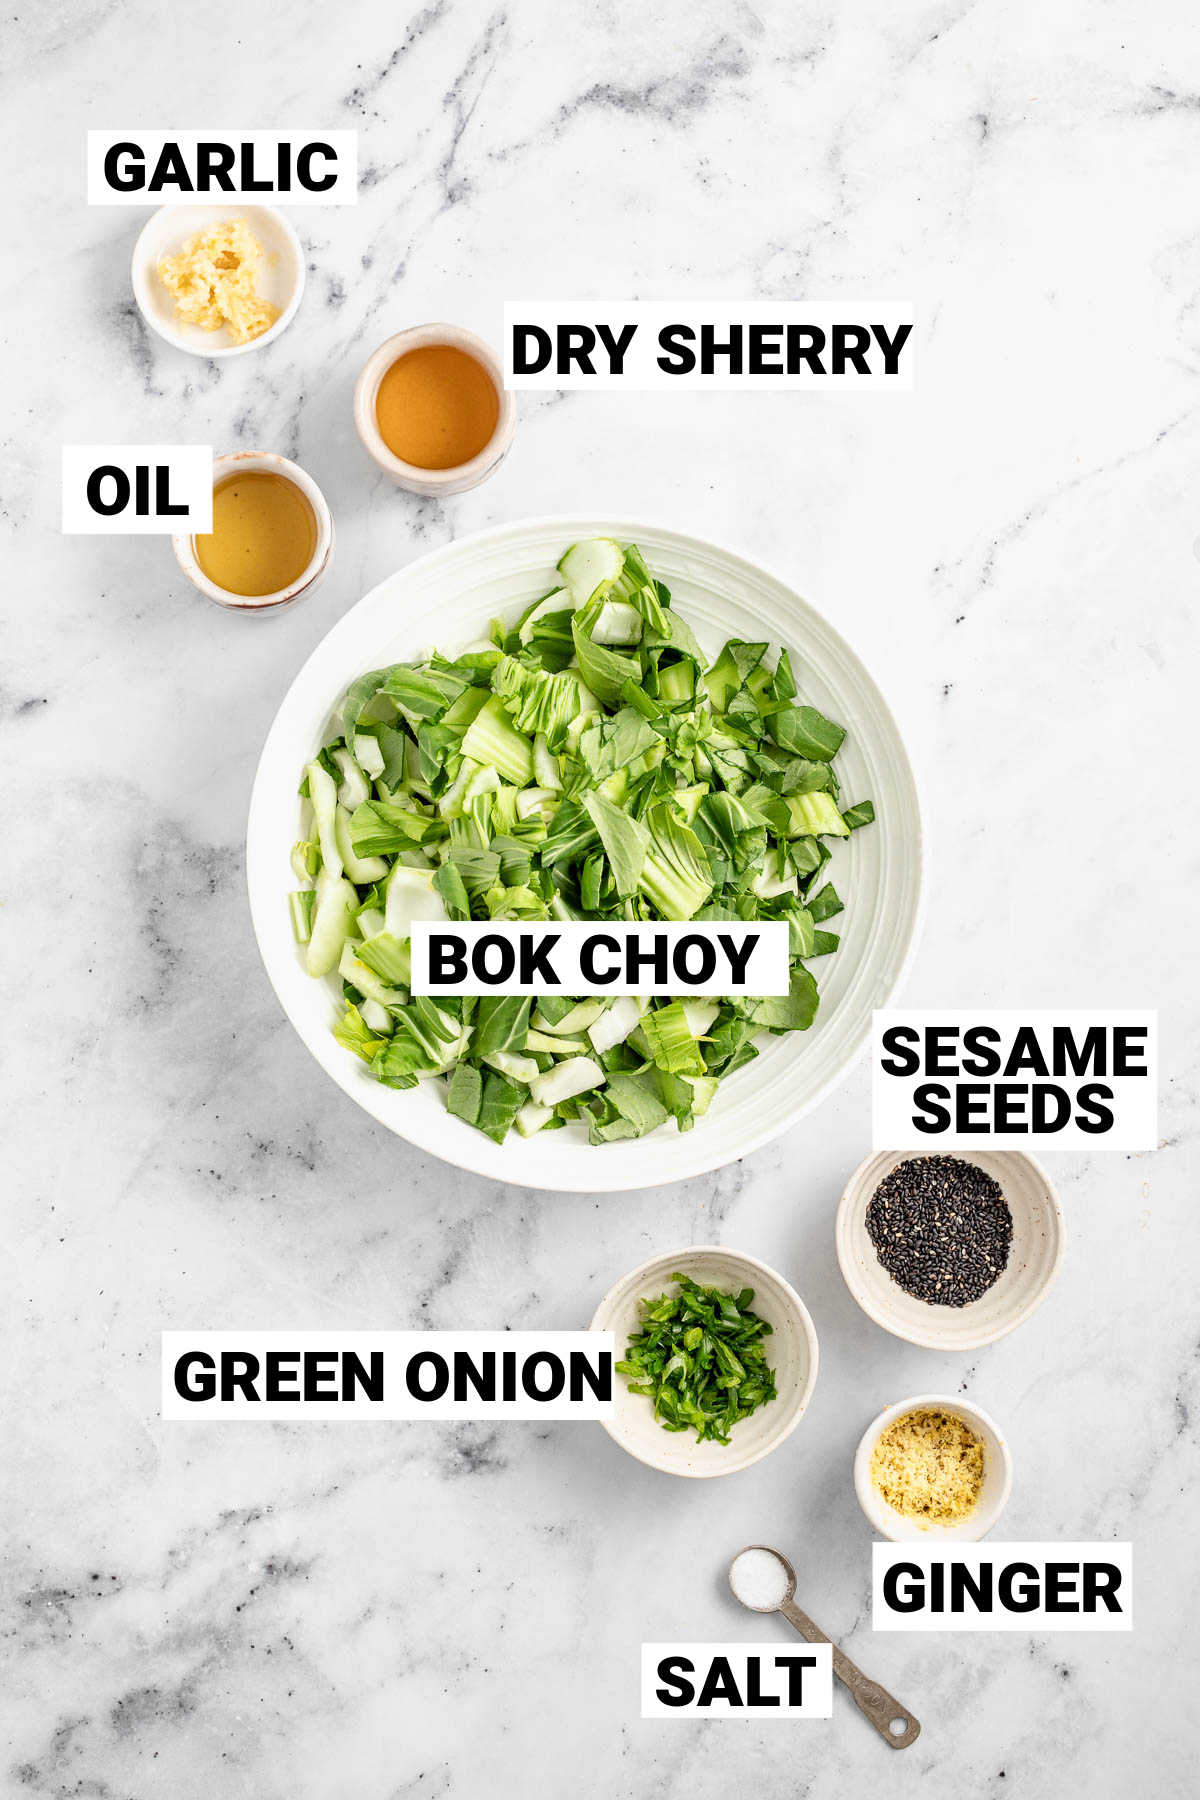 Basic bok choy ingredients including dry sherry, scallions, ginger, garlic, oil and sesame seeds